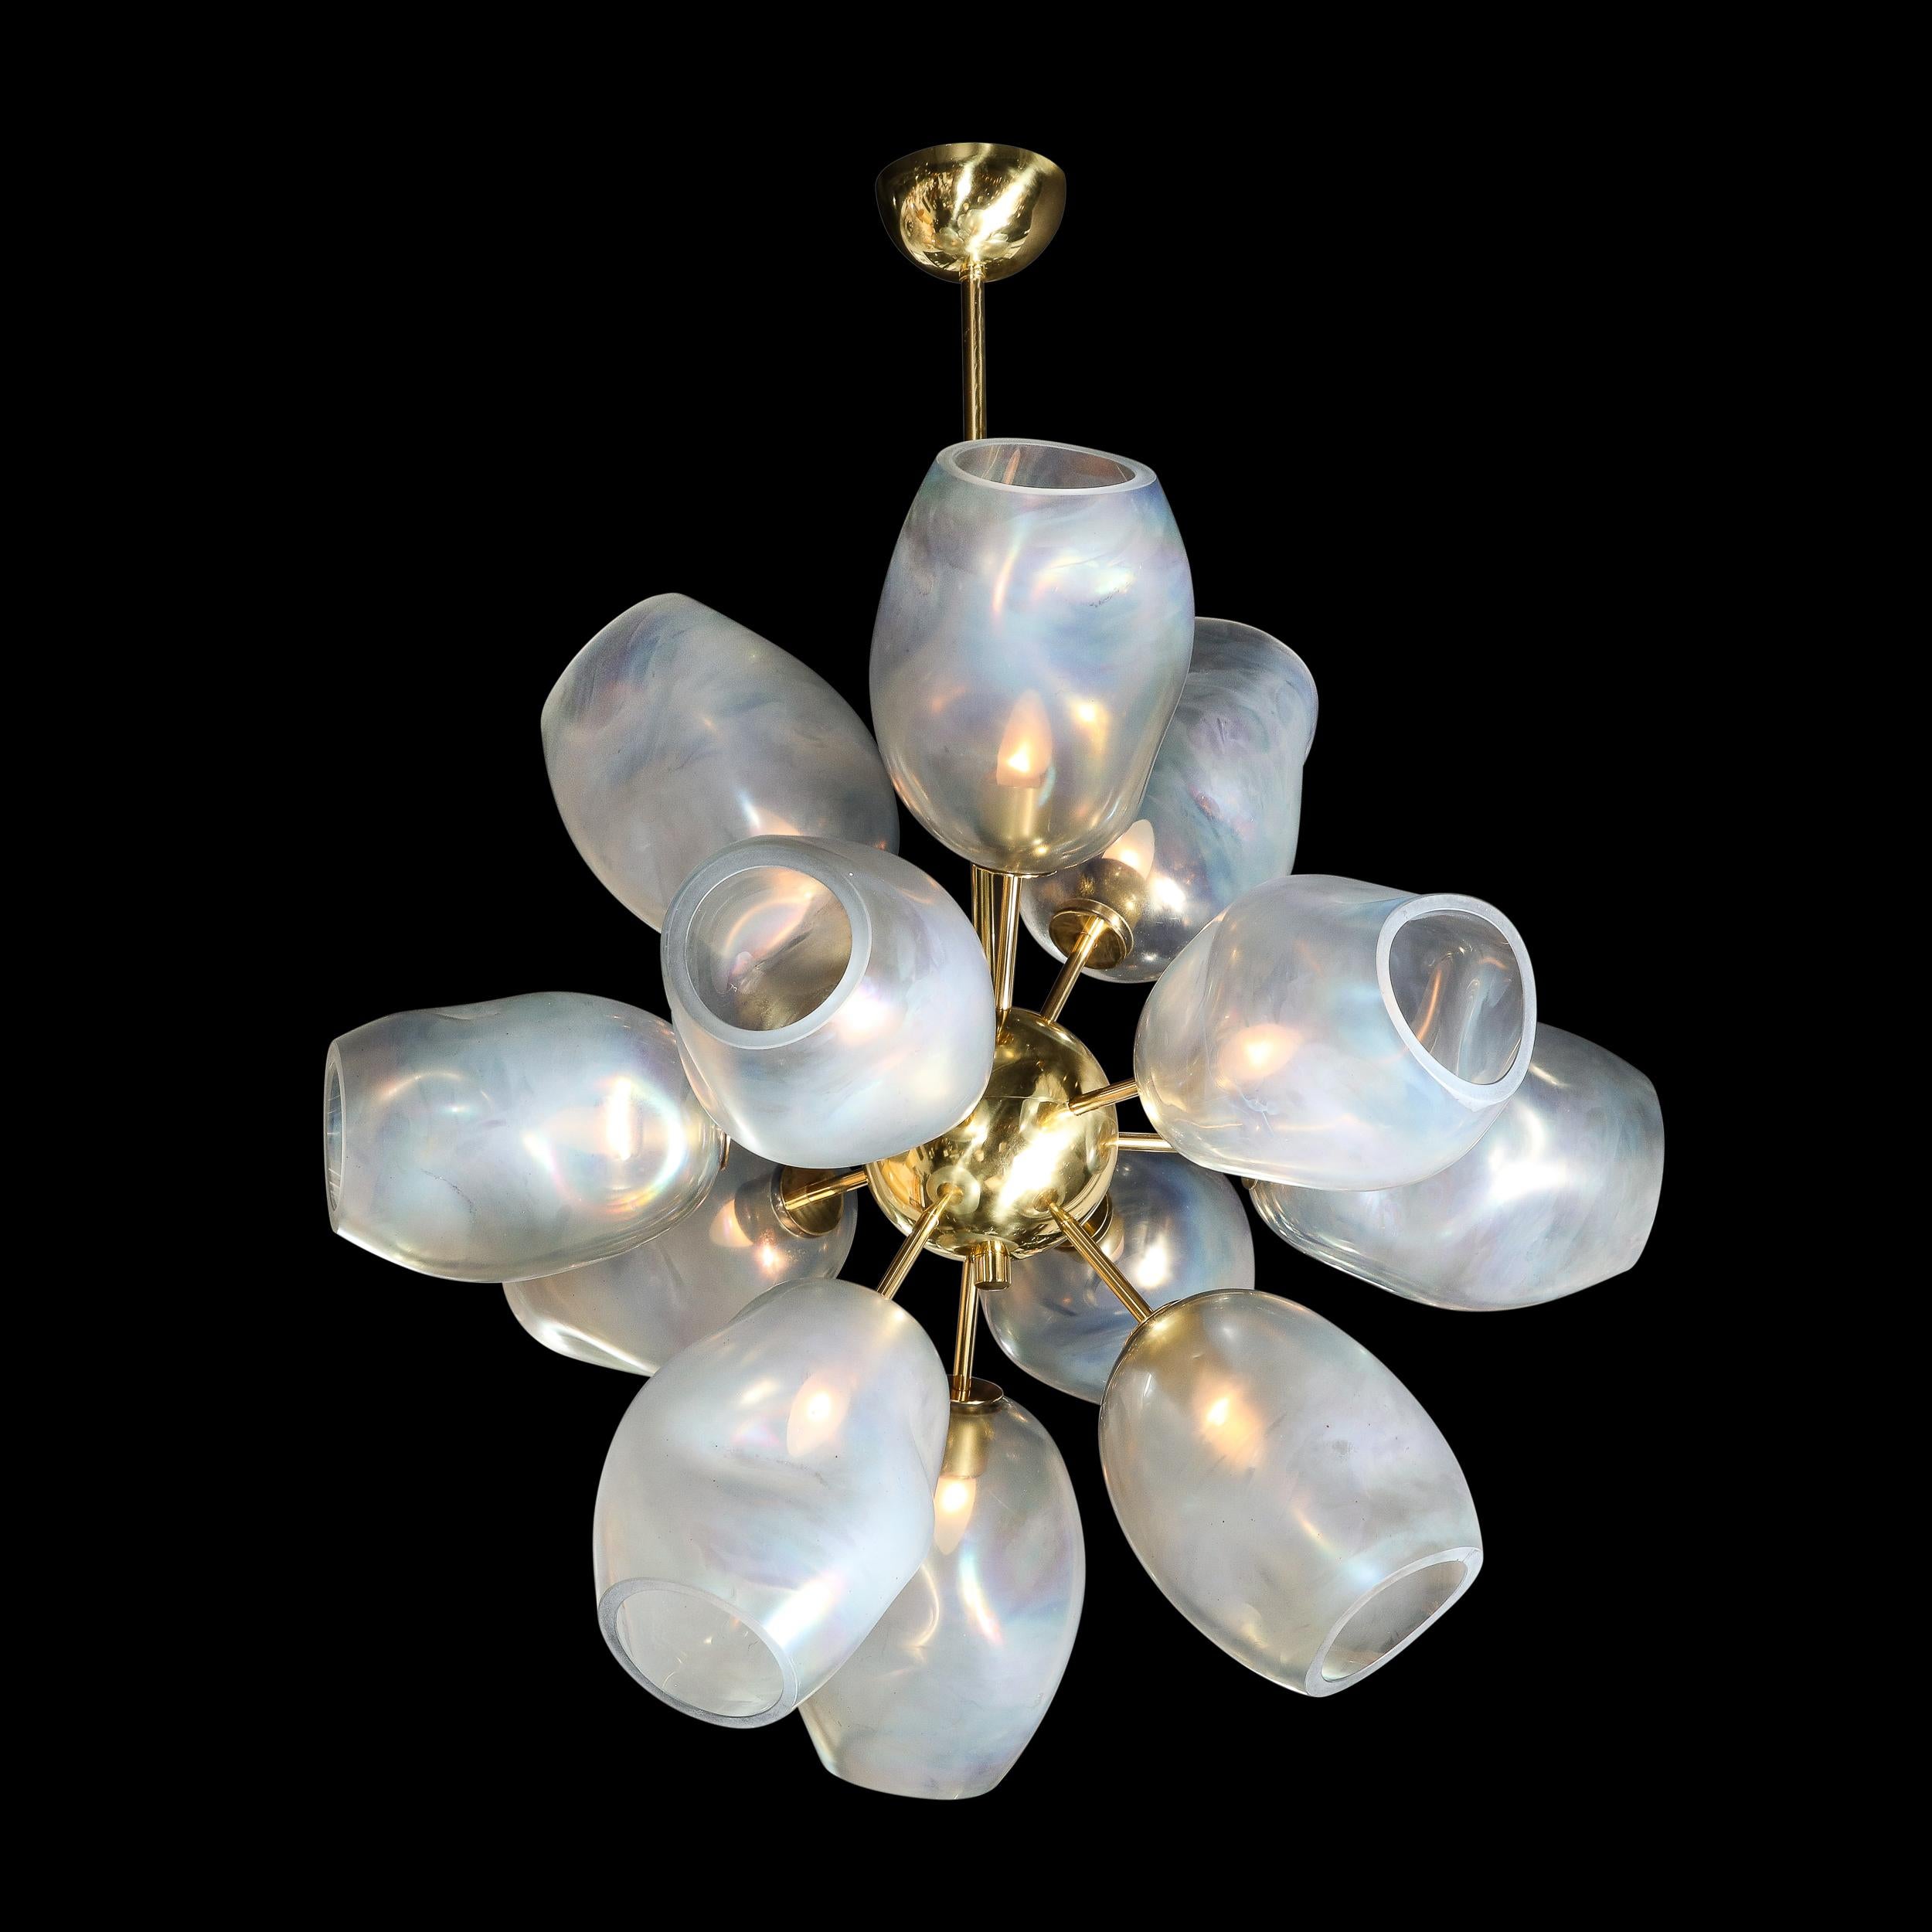 Exclusive to High Style Deco, this stunning modernist chandelier was handblown in Murano, Italy- the island off the coast of Venice renowned for centuries for its superlative glass production. This beautiful fixture offers twelve lustrous polished